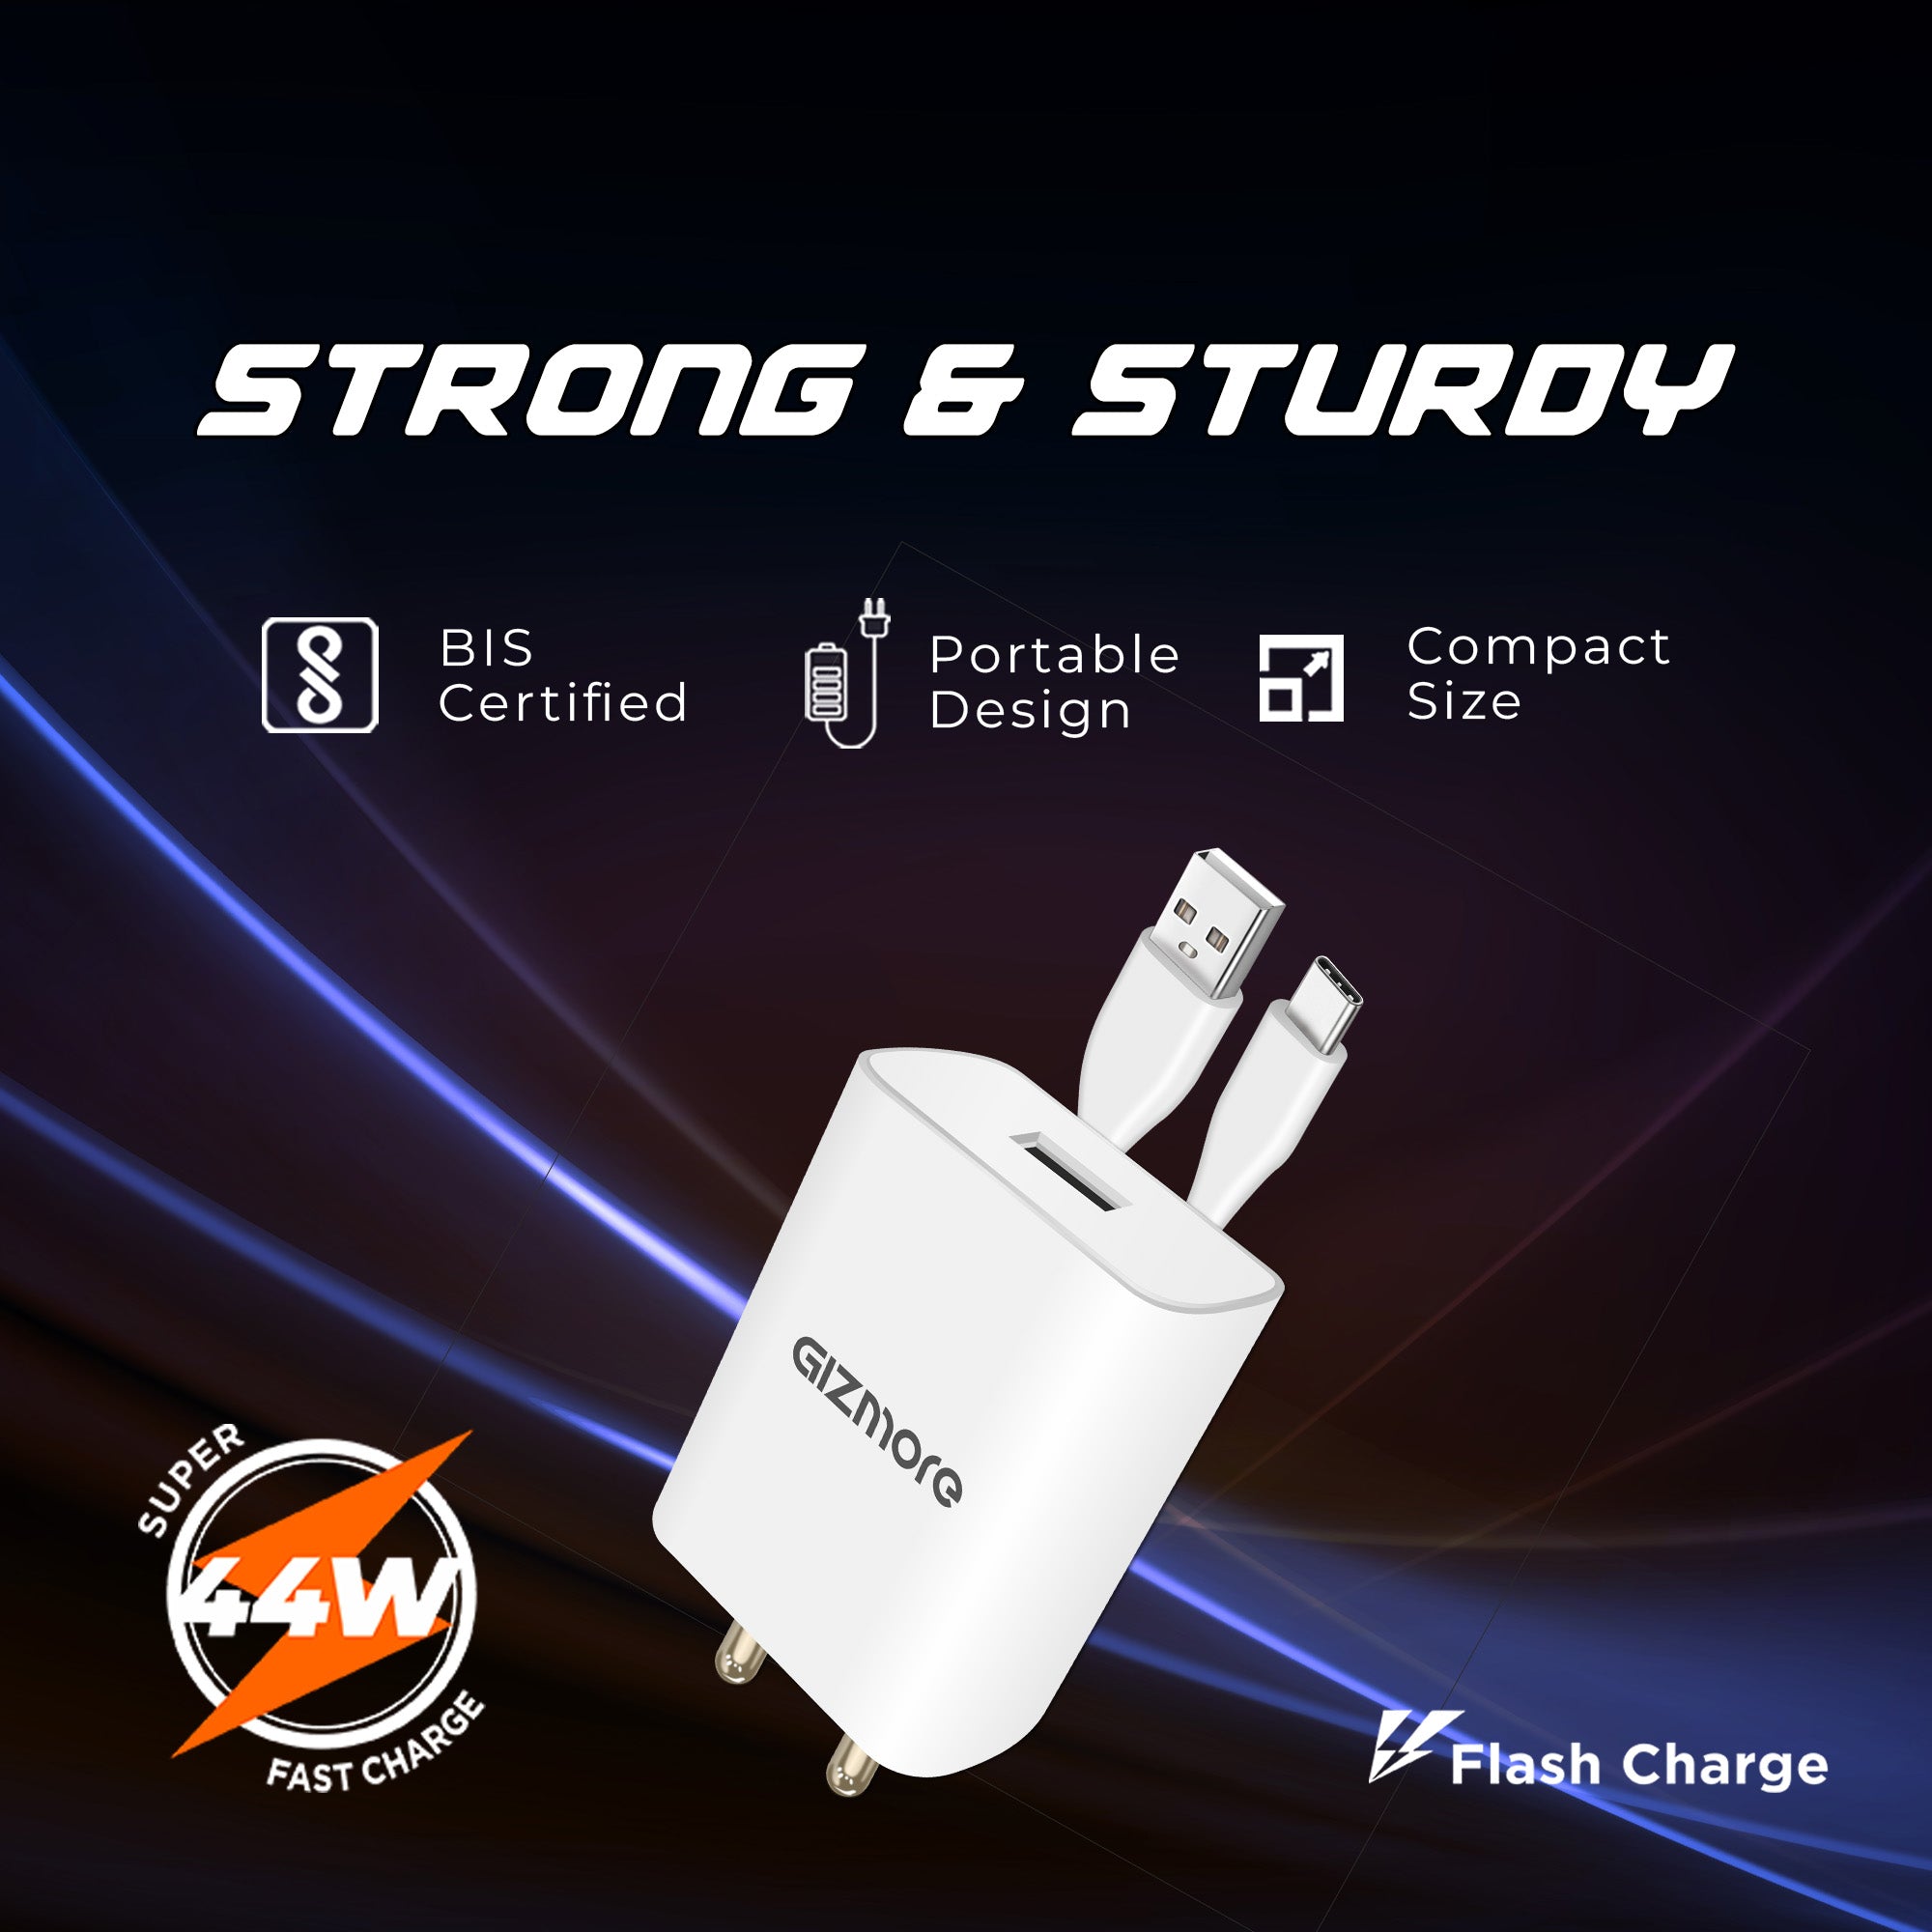 GIZMORE PA644 44W FLASH & SUPER VOOC USB Fast Charger Adapter Compatible with All Smartphones, Compact & Lightweight with Secure Charging, Versatile Protocol QC2.0/QC3.0/AFC, SUPERVOOC/ DASH/ WARP/DART and FLASH with Cable